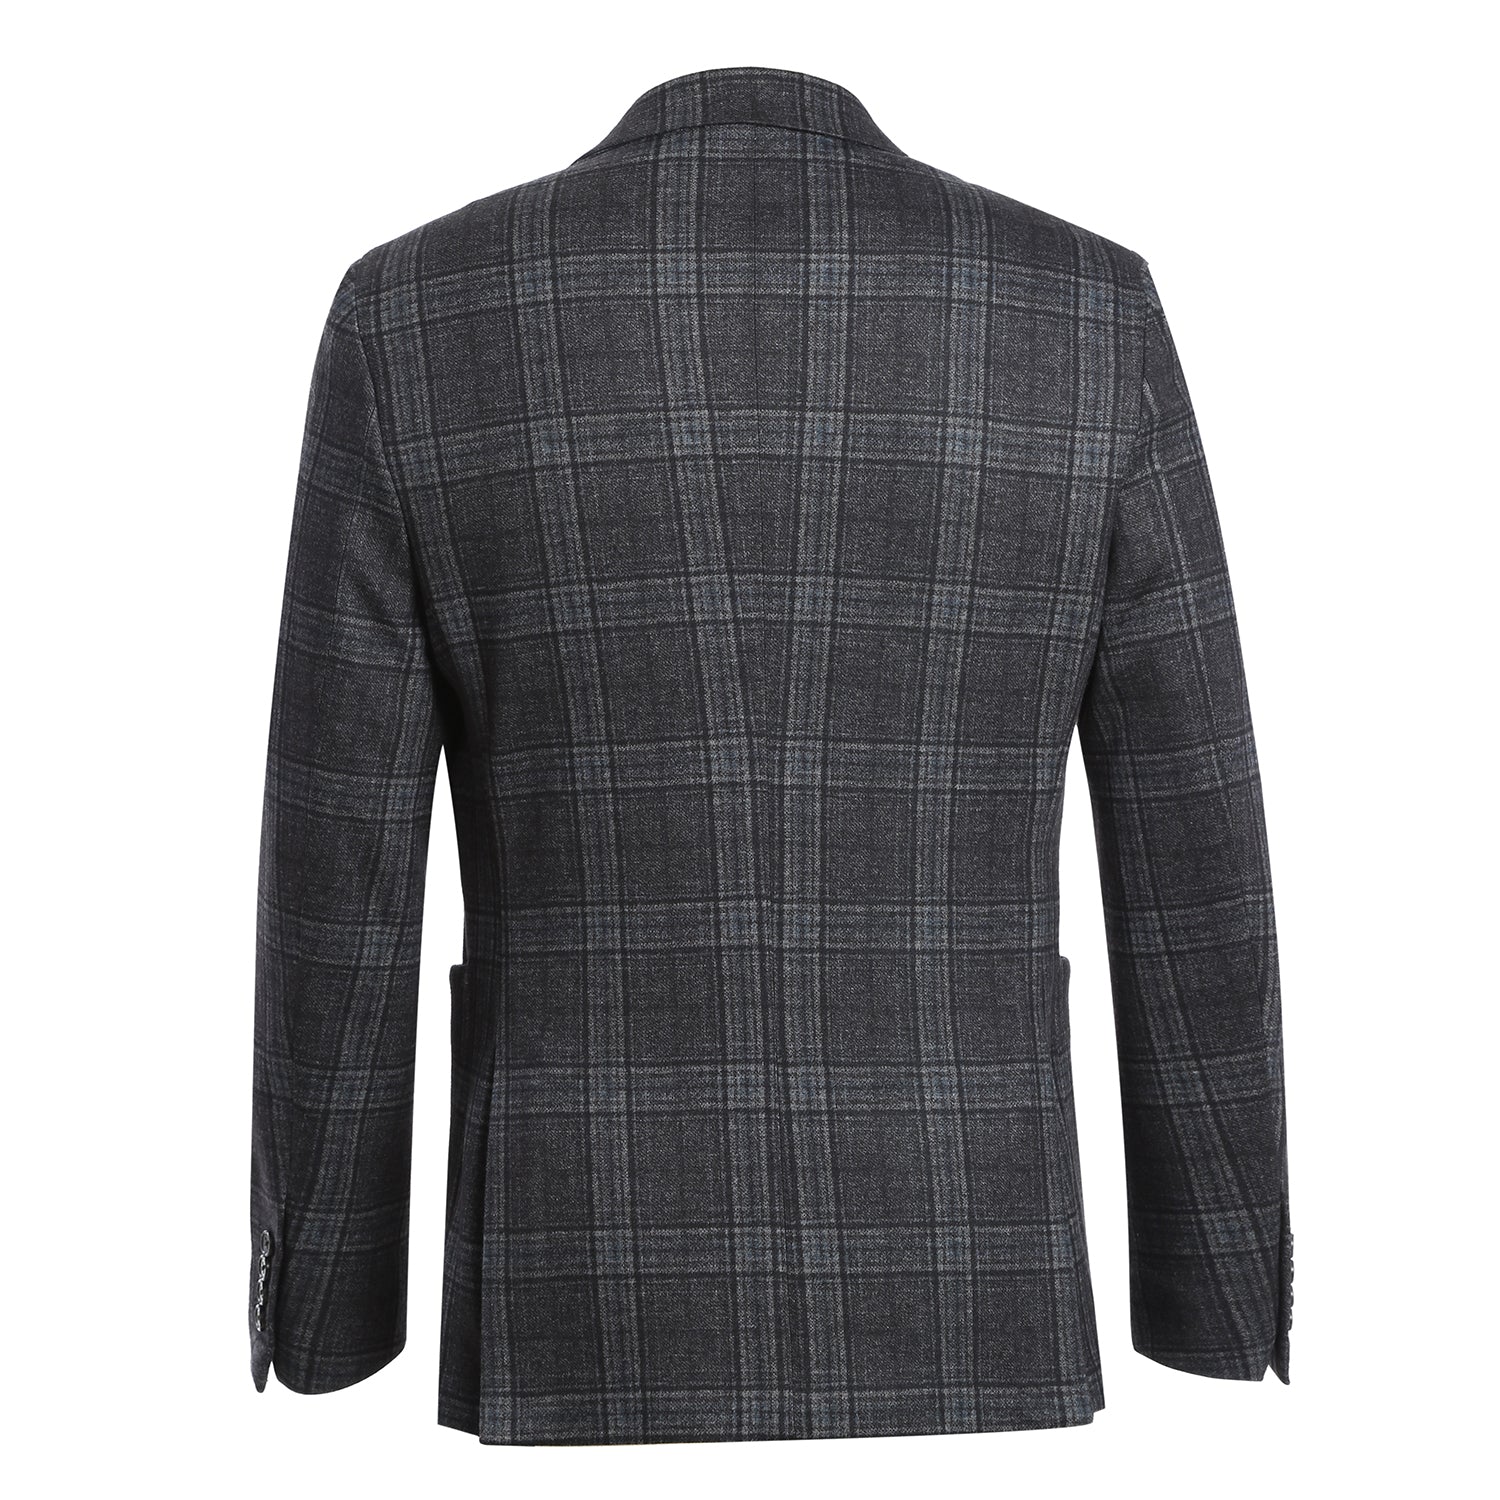 Single Breasted SLIM FIT Half Canvas Soft Jacket in Charcoal Plaid (Regular and Long Available) by Pelago